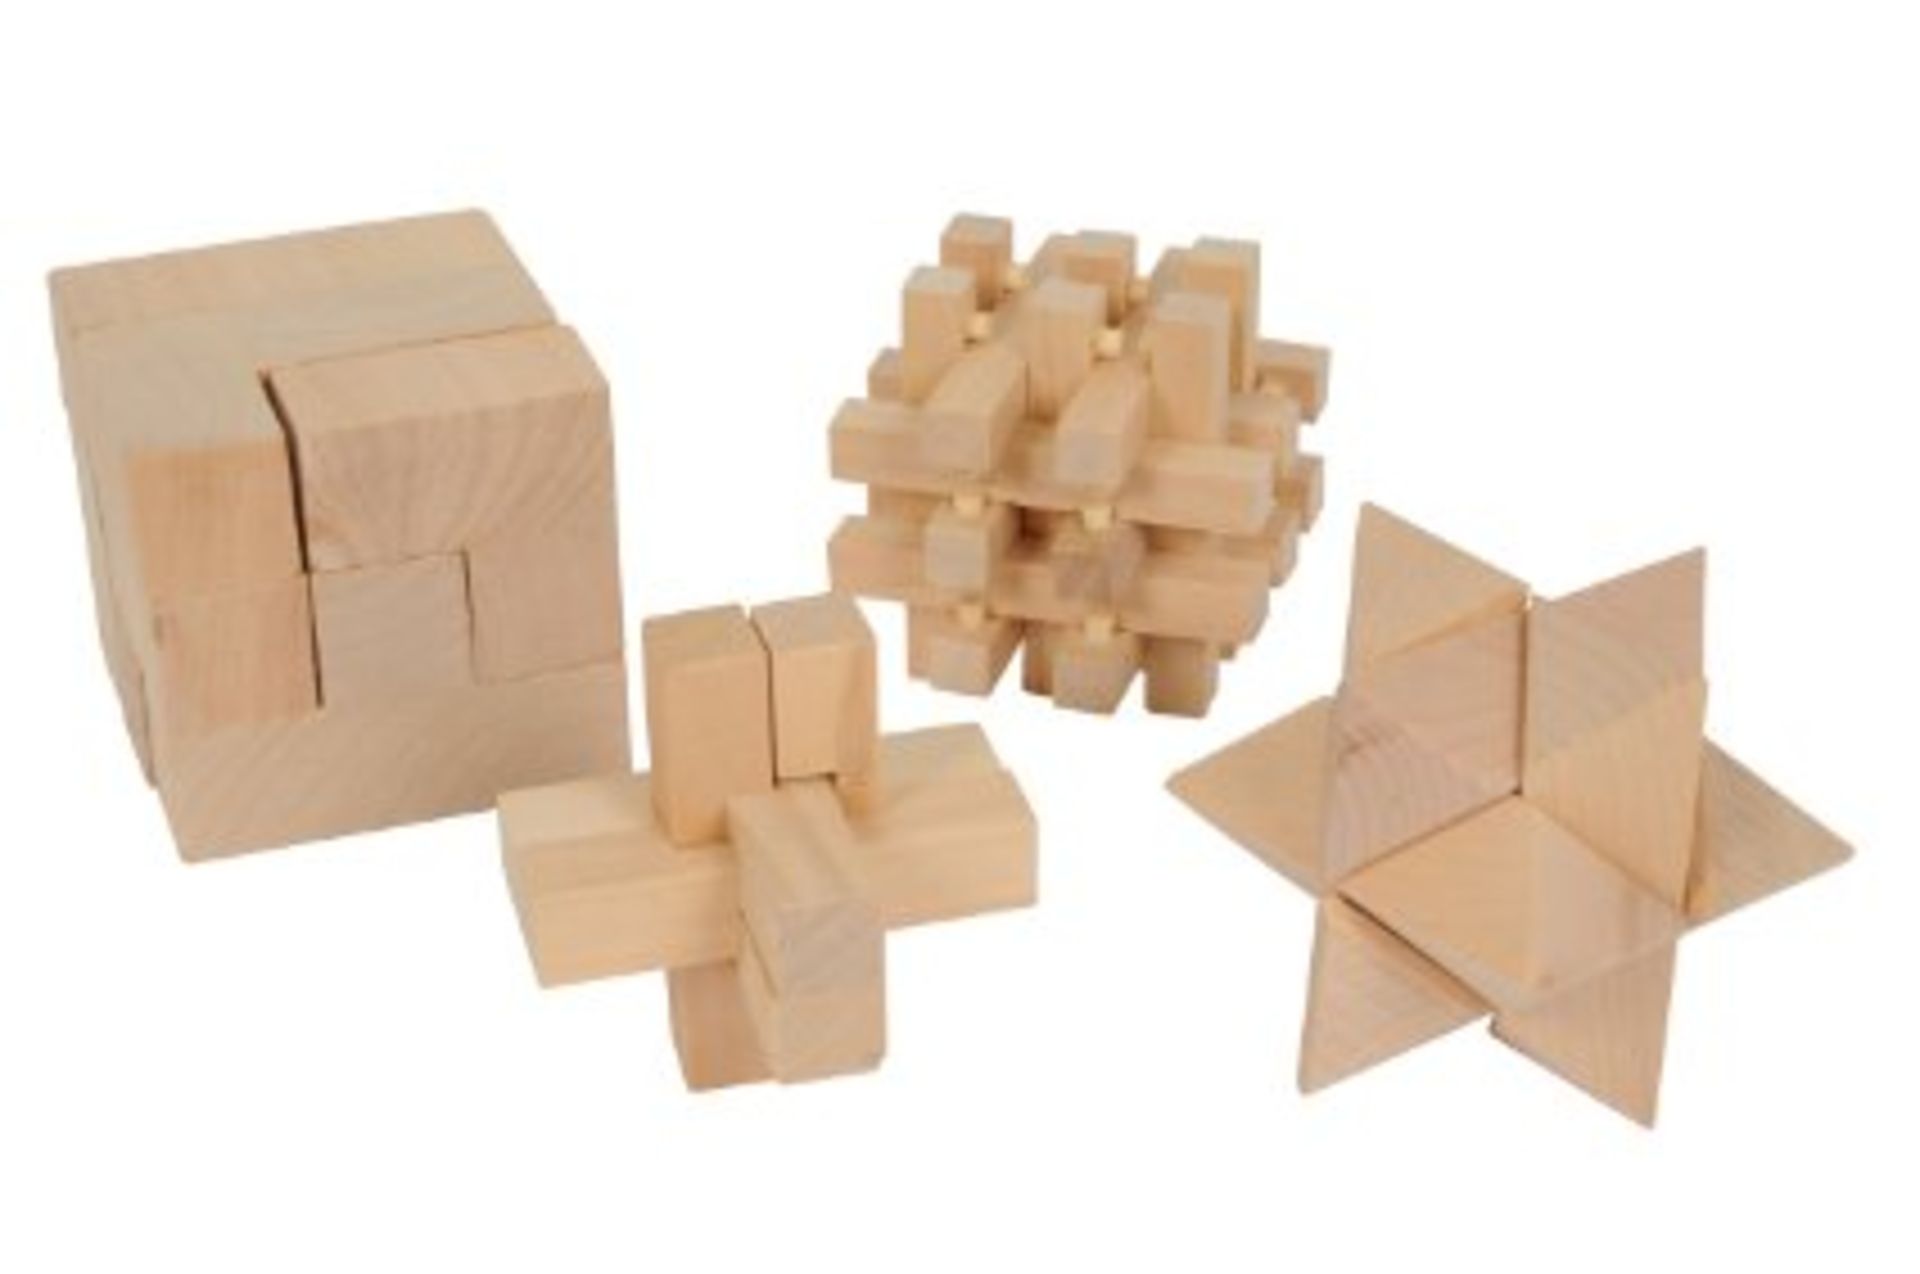 V *TRADE QTY* Brand New Boxed Set Four Quality Wooden Brain Teaser Puzzles ú10.89 on Ebay X 12